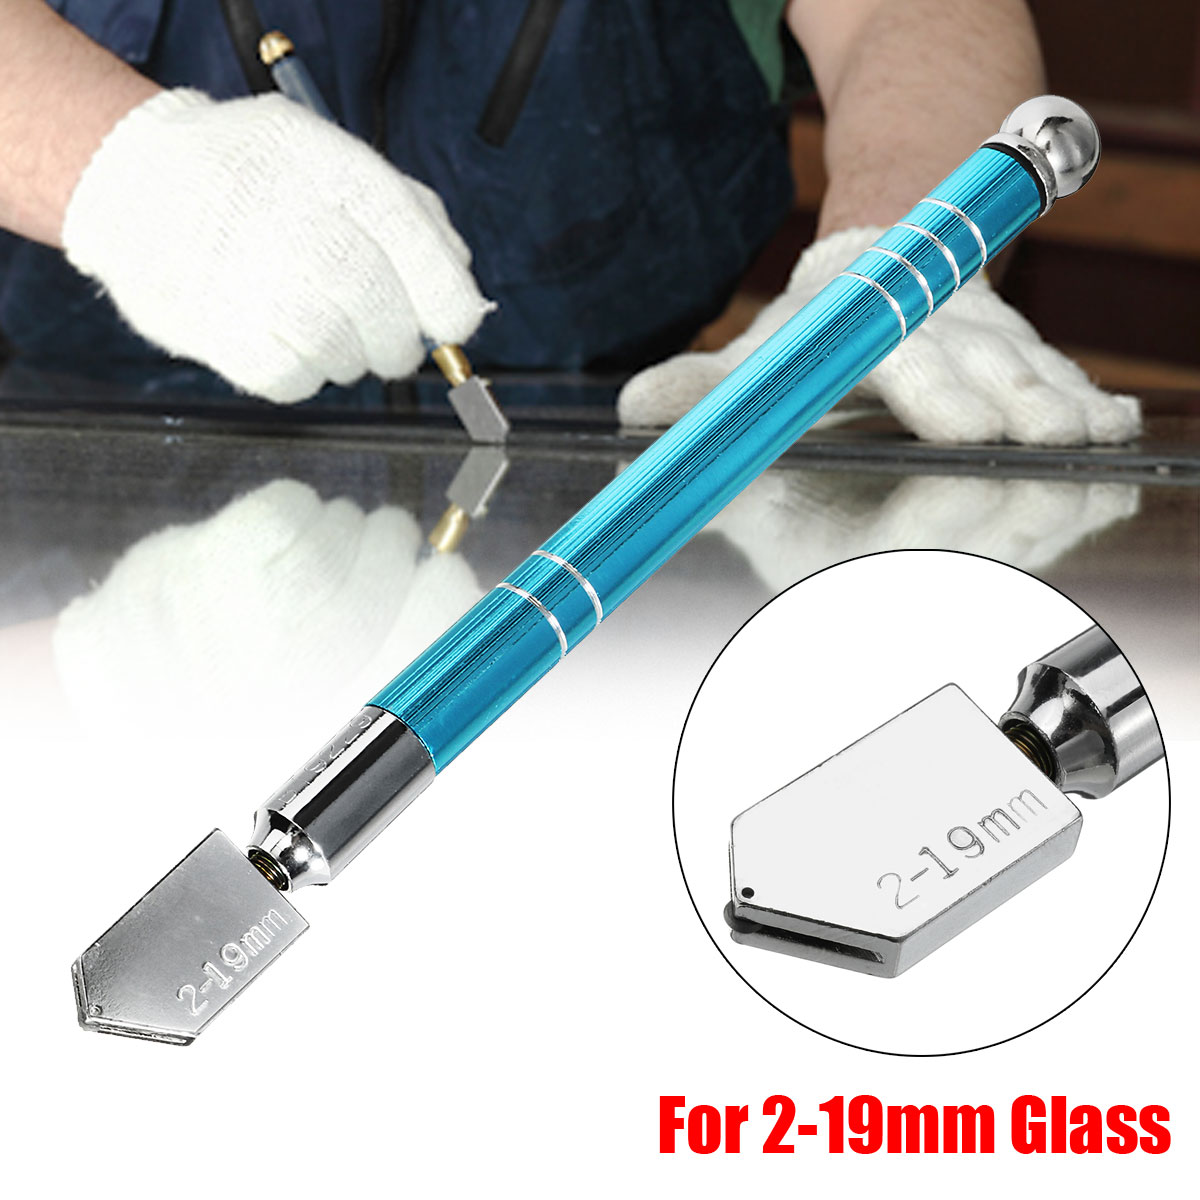 Portable-Glass-Cutter-Anti-Slip-Handle-Diamond-Minerals-Tipped-Glass-Cutter-for-2-19mm-Glass-1285318-1